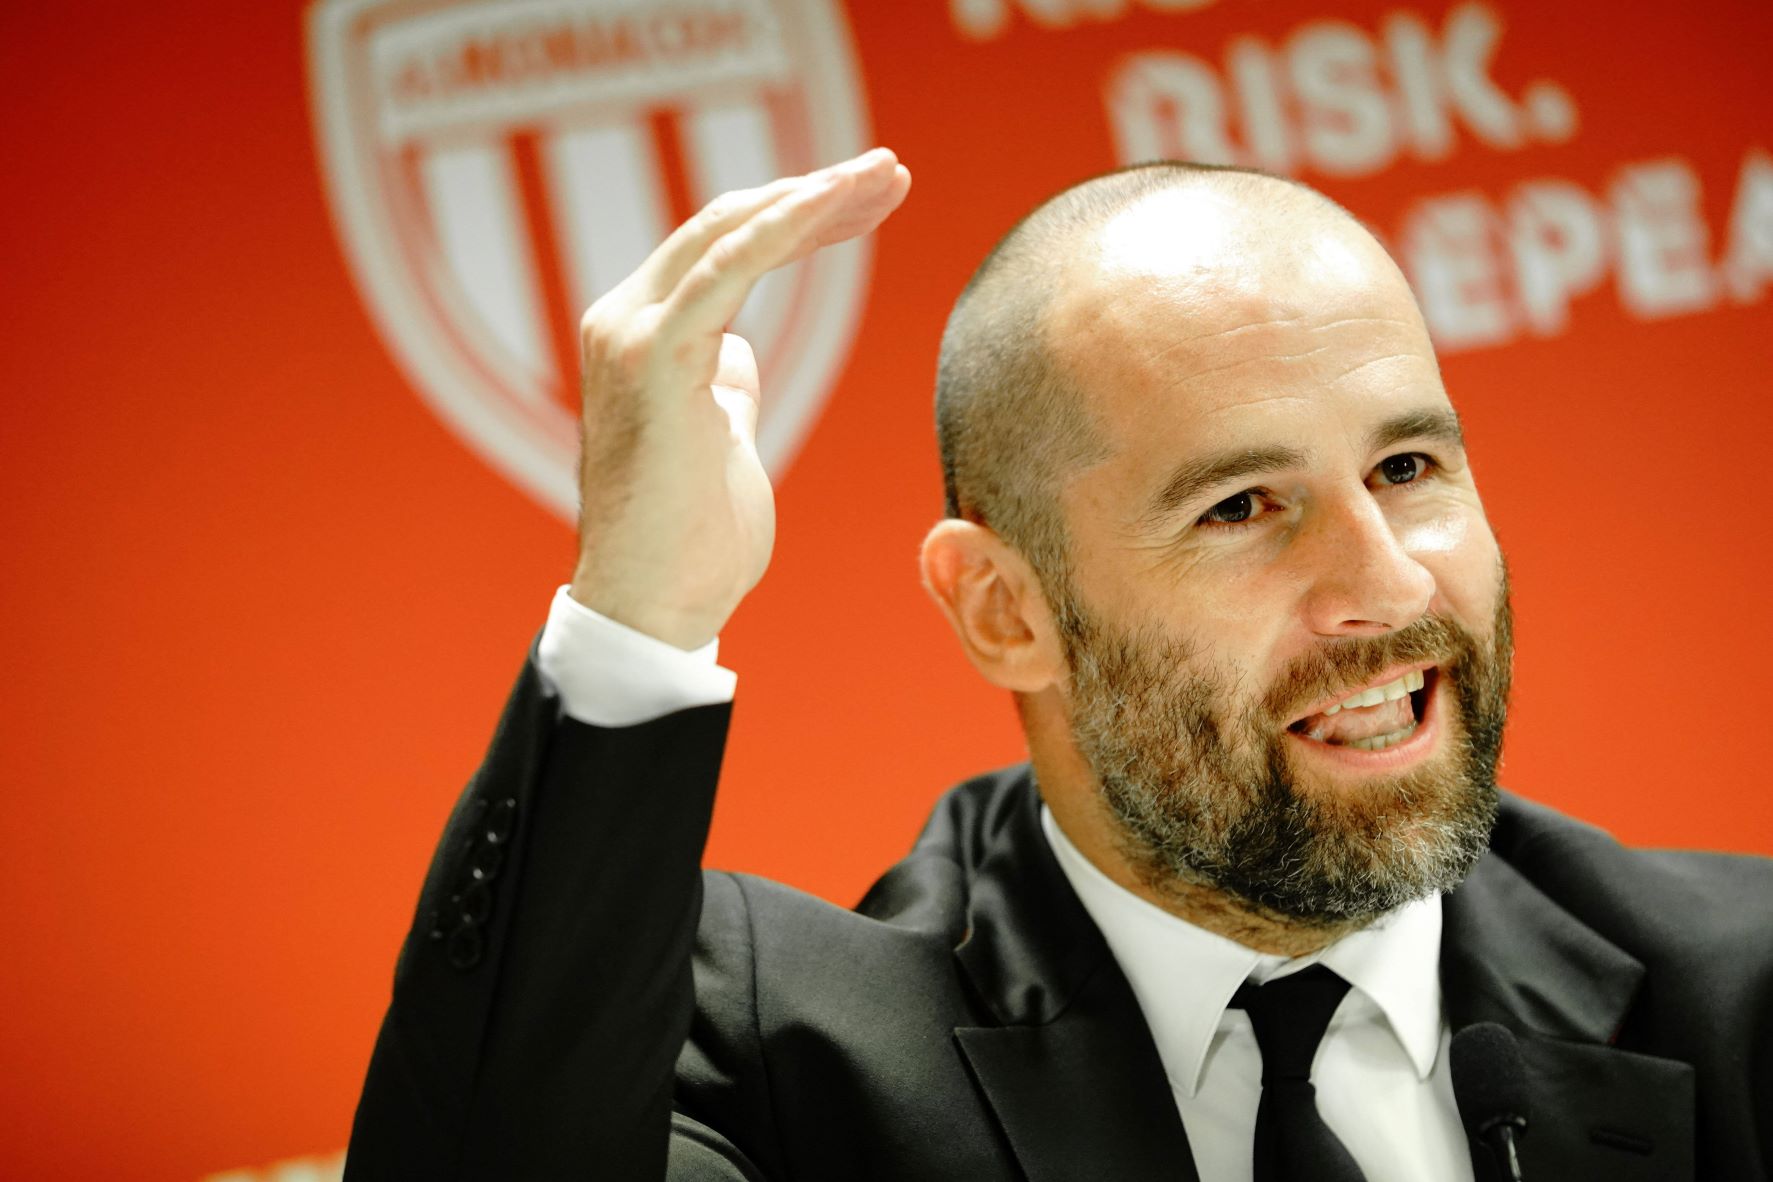 Paul Mitchell to leave Monaco sporting director role